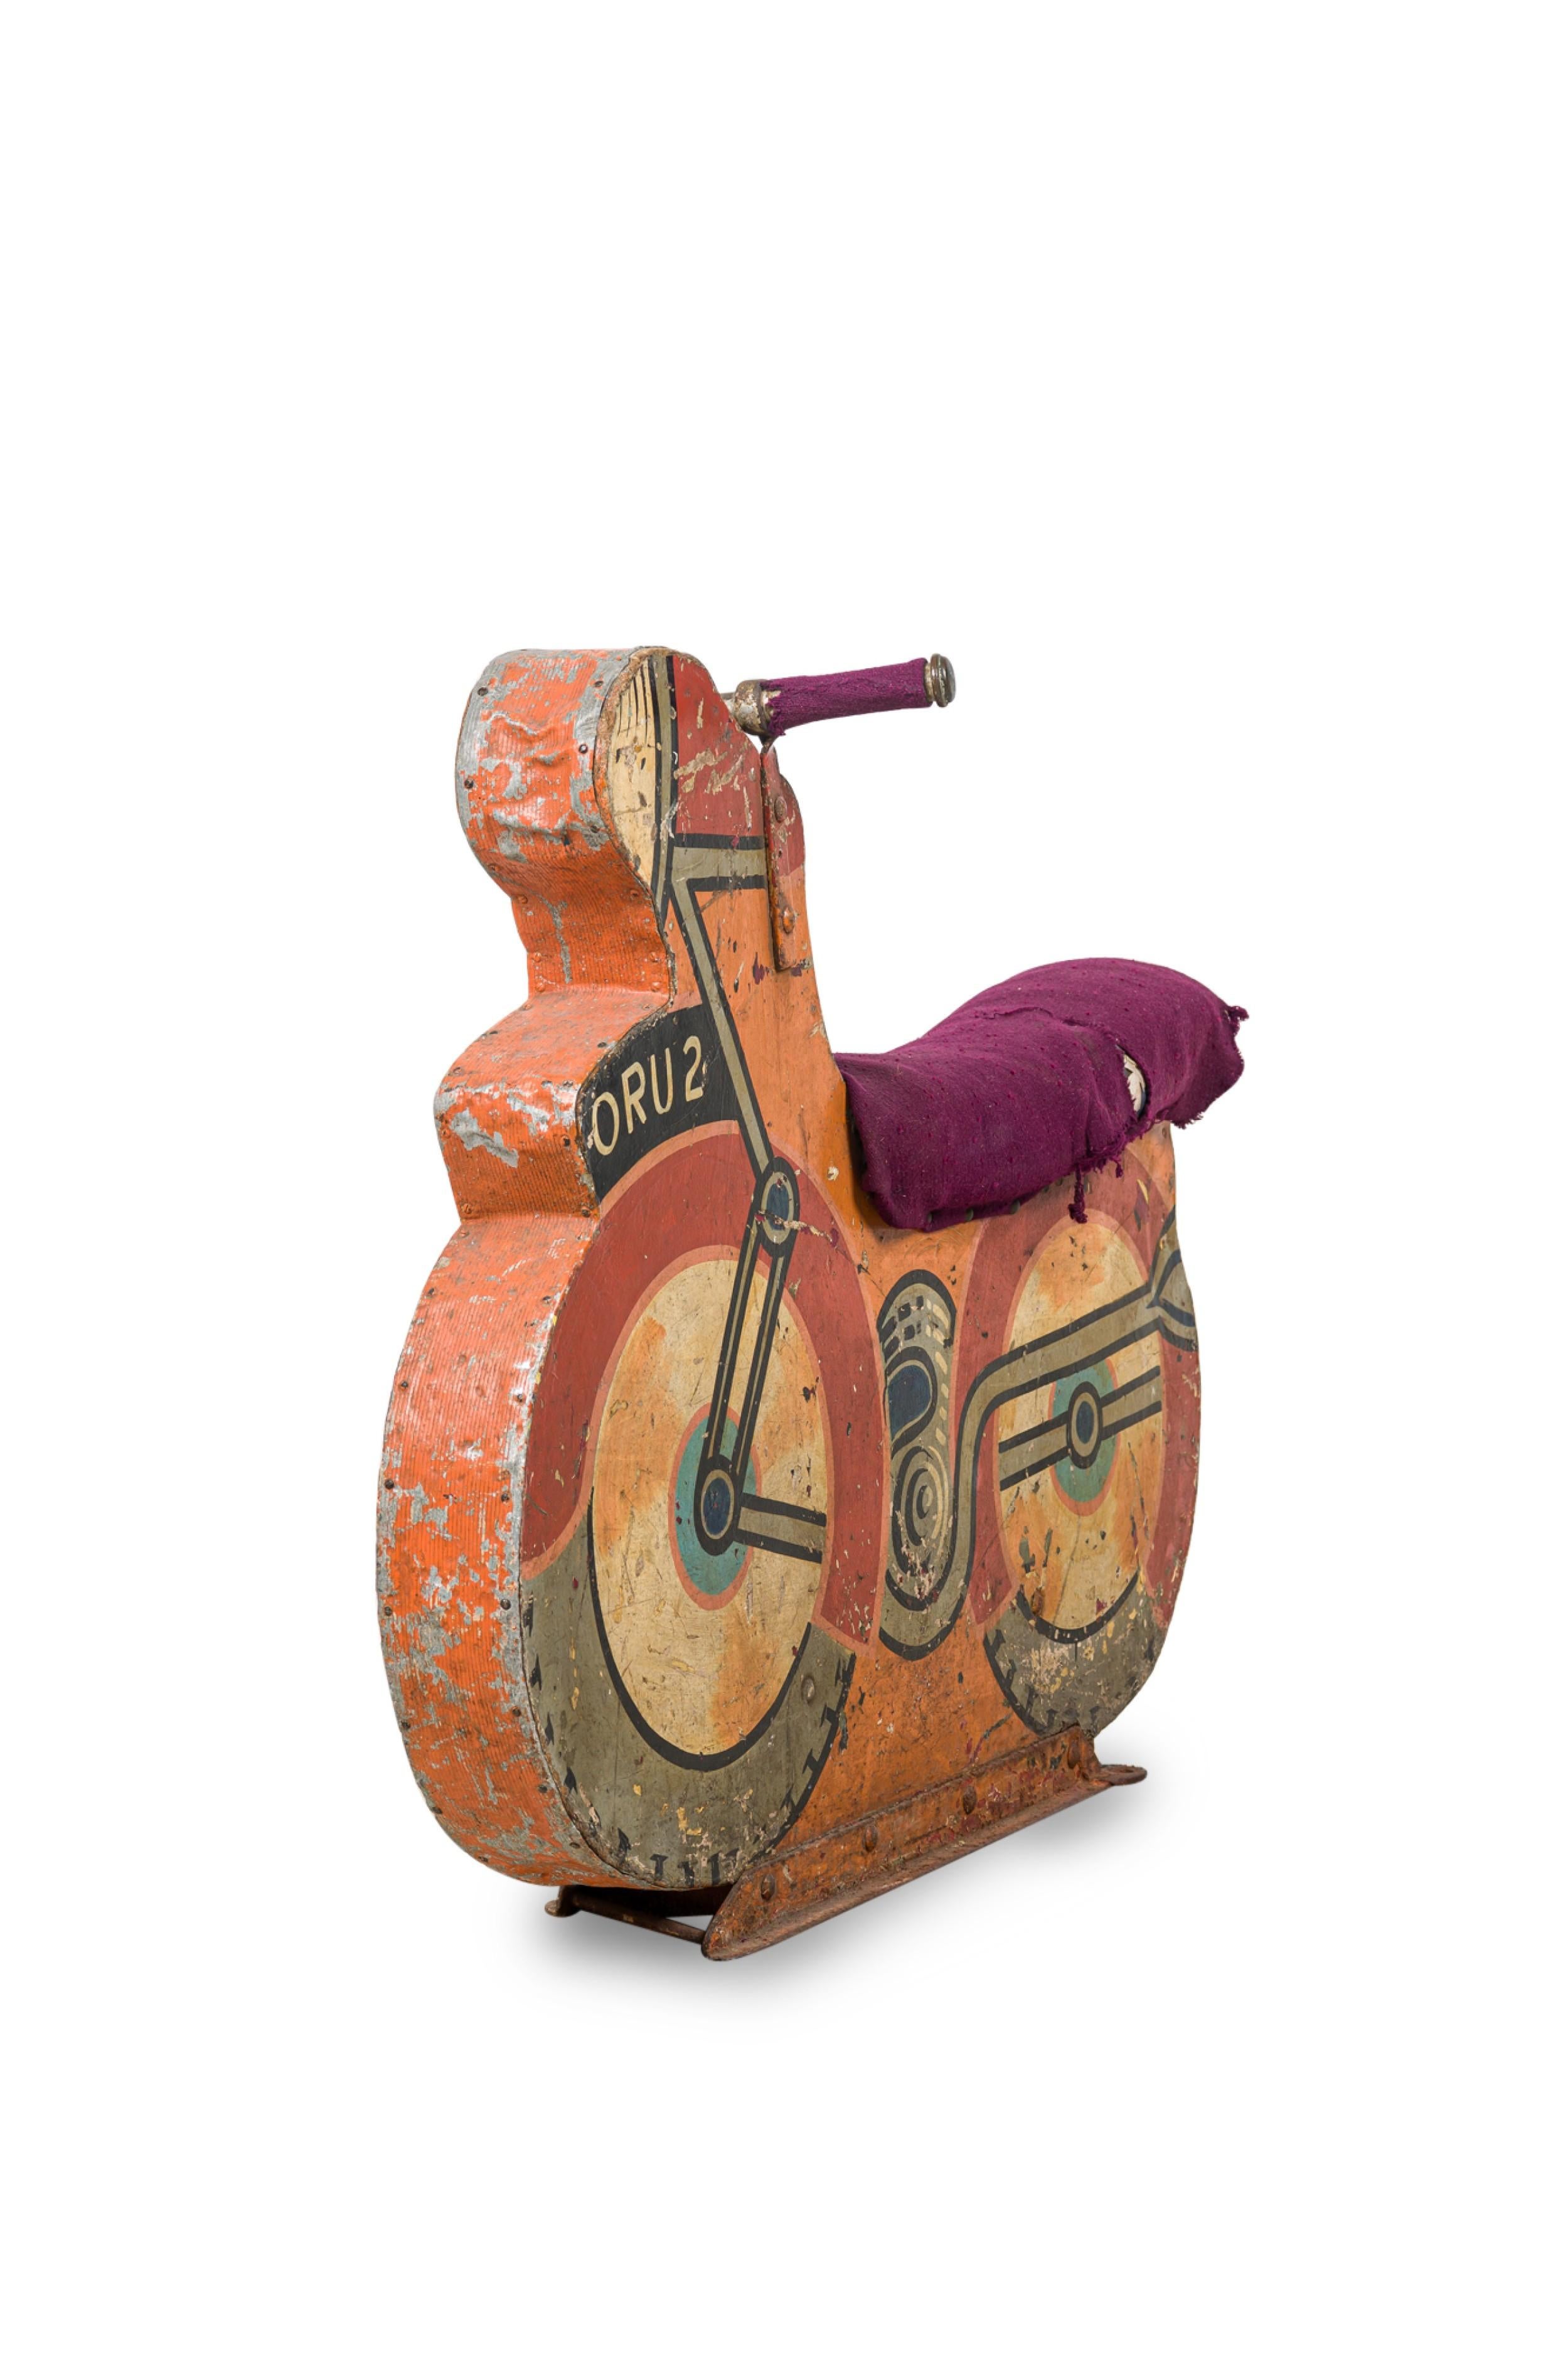 American Mid-Century Carousel hand painted motorcycle design with purple upholstered seat and handles bars
